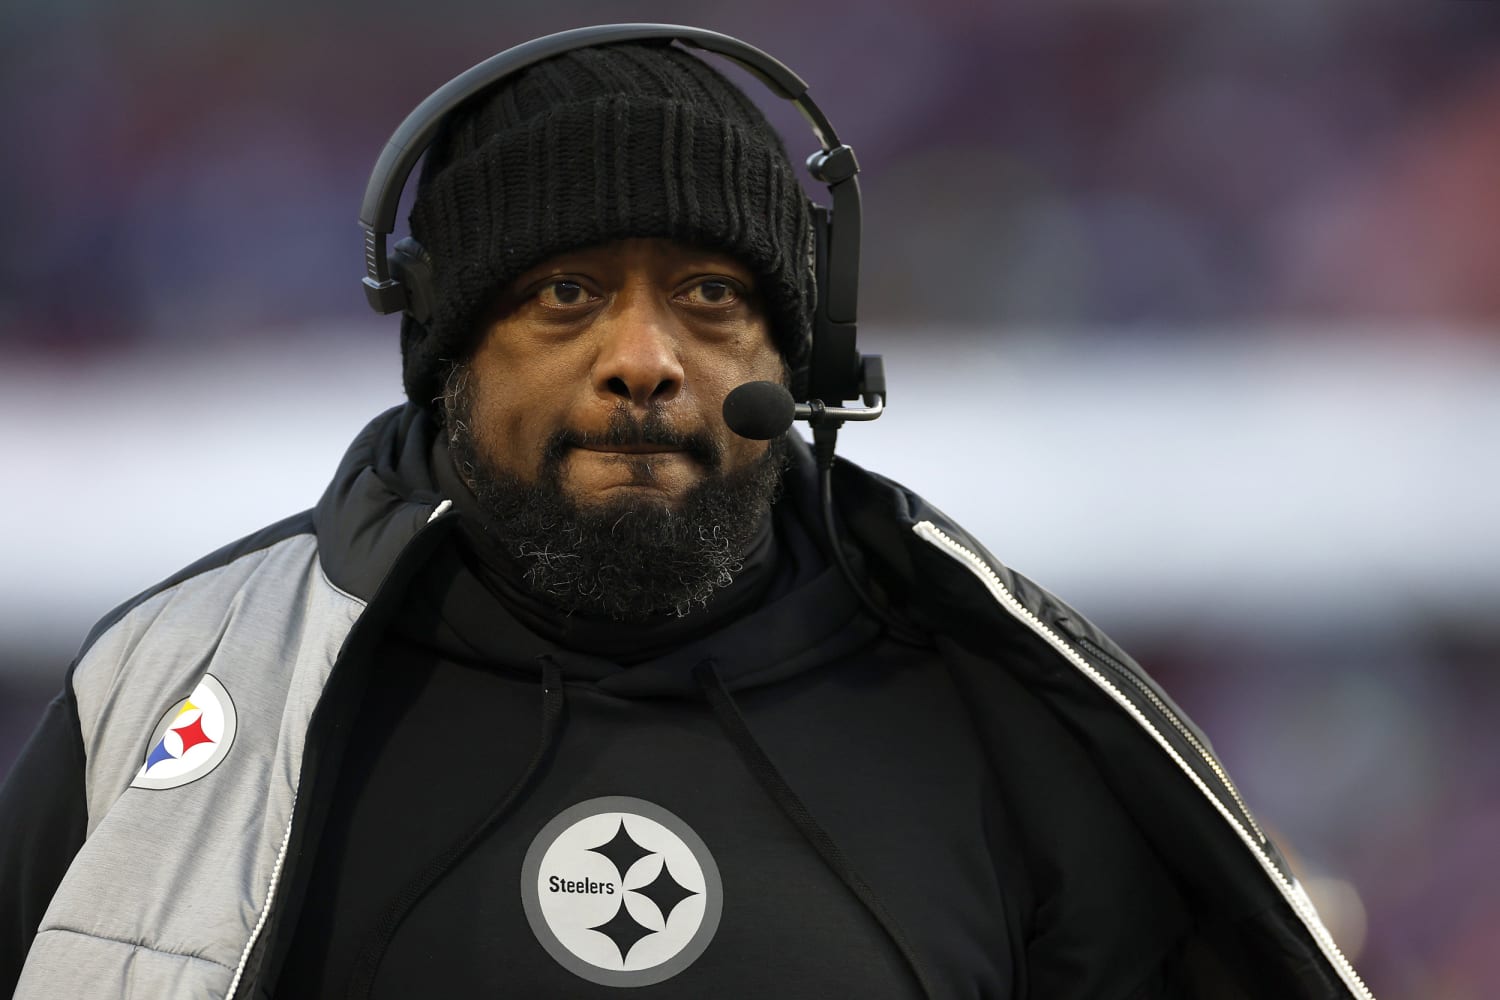 Steelers coach Mike Tomlin abruptly ends news conference as soon as reporter mentions his contract